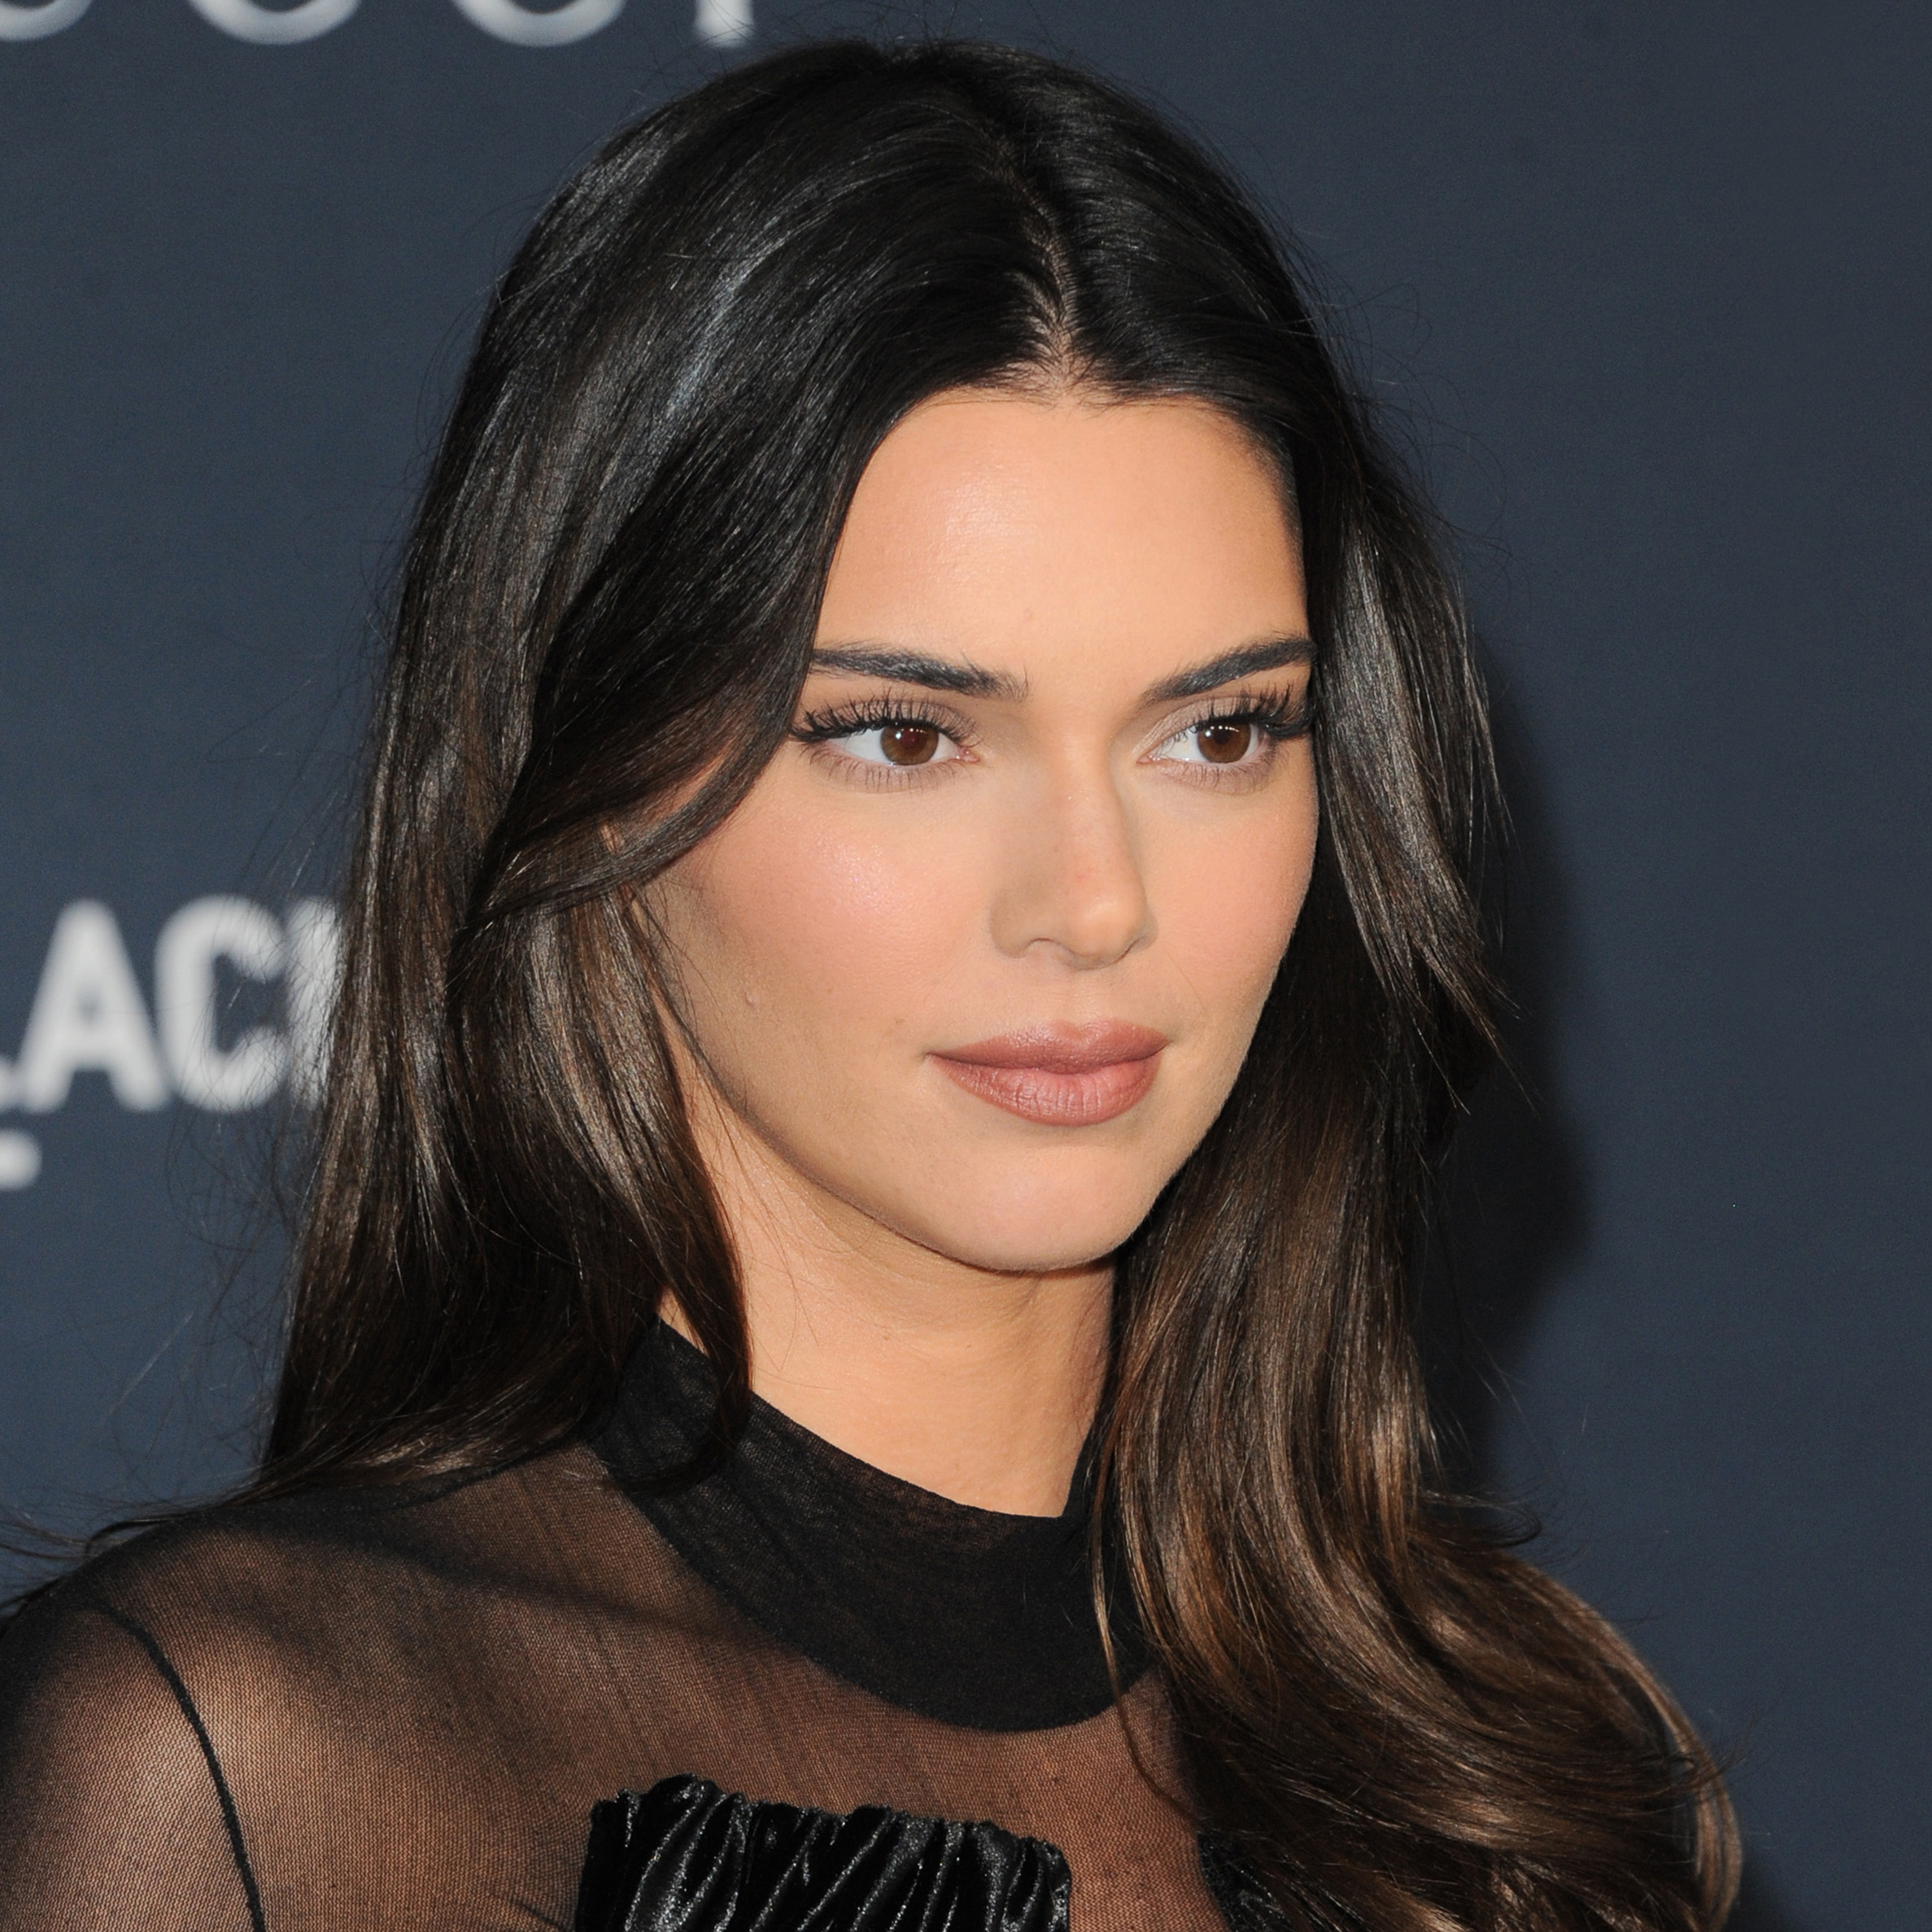 Kendall Jenner and other celebs prove fashion isn't just black and white